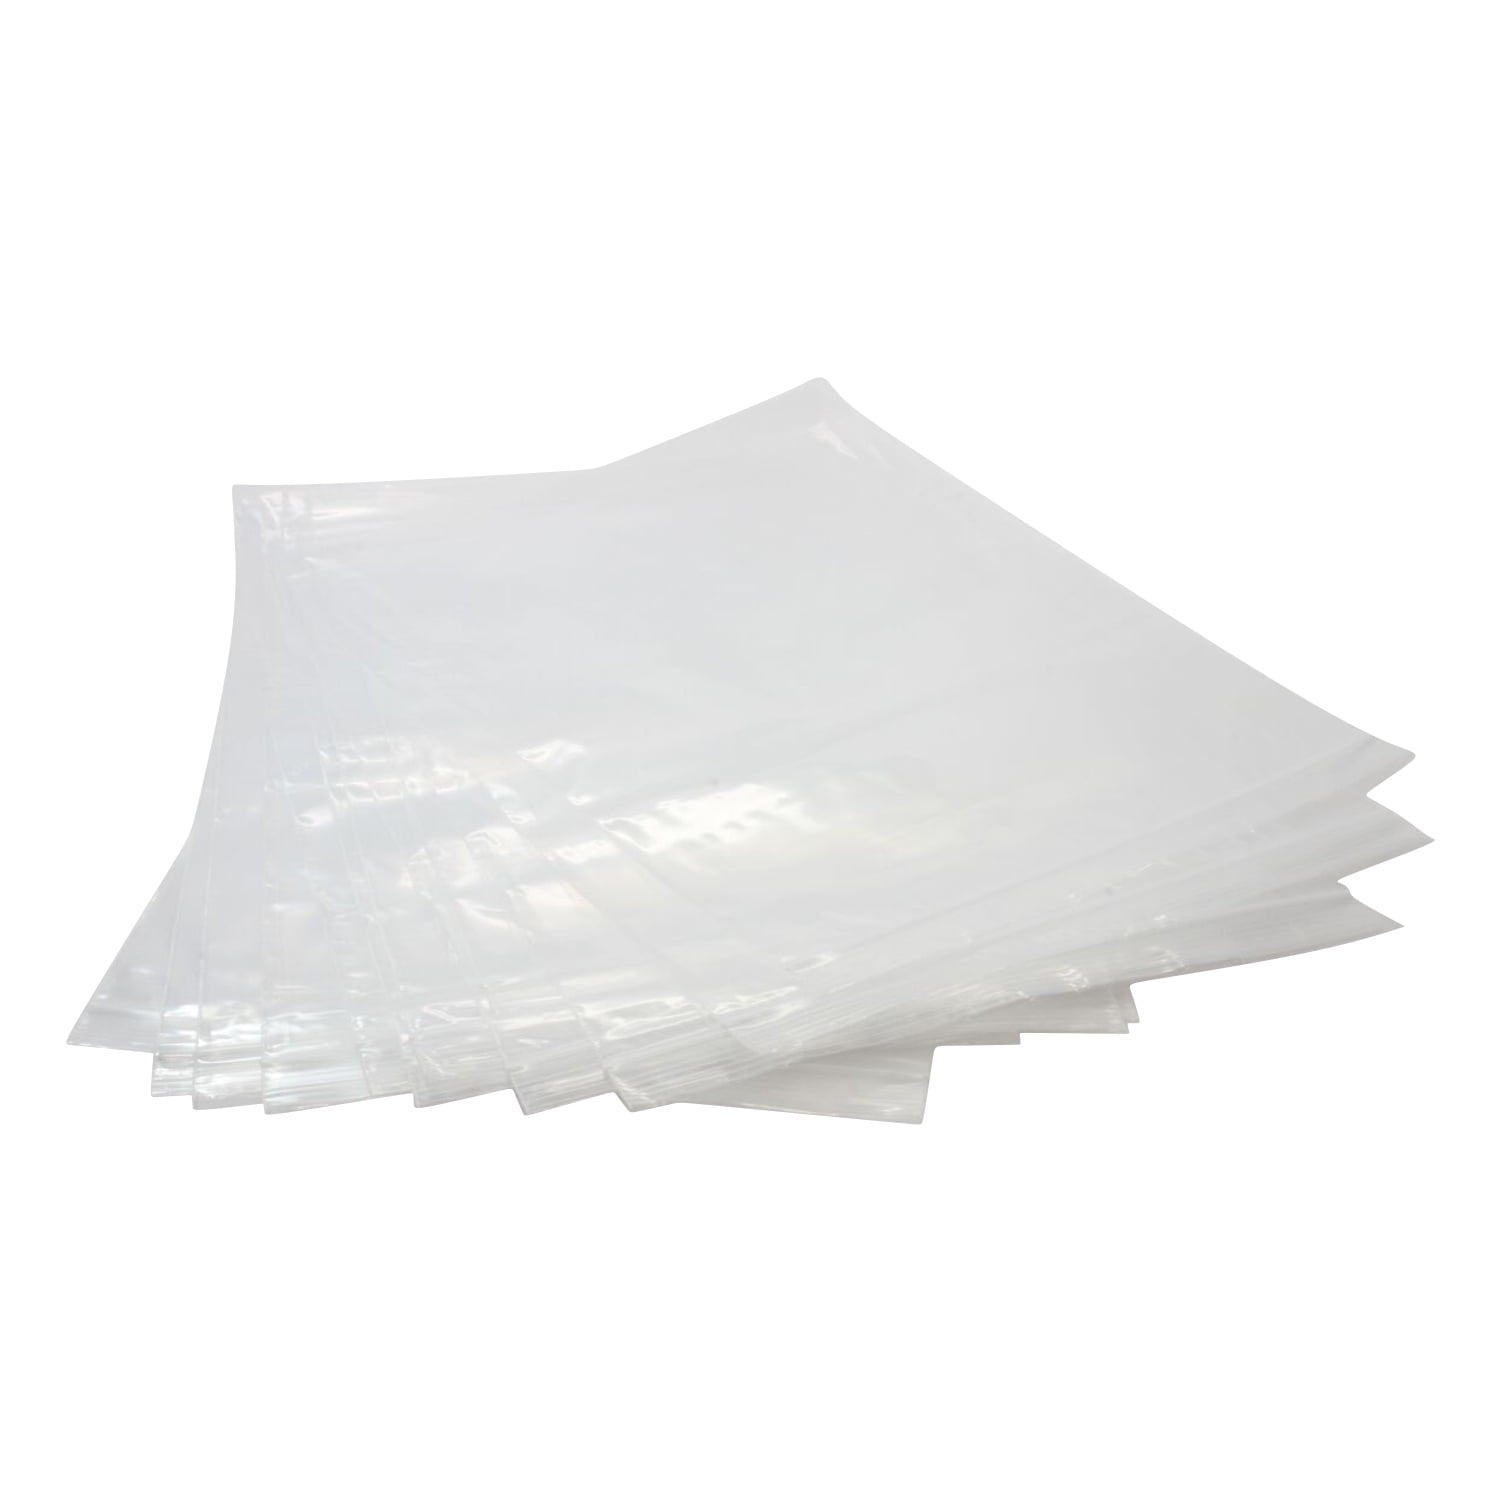 100 pack of 5x3 Reclosable Resealable Clear Zipper Poly Plastic Bags 2 Mil